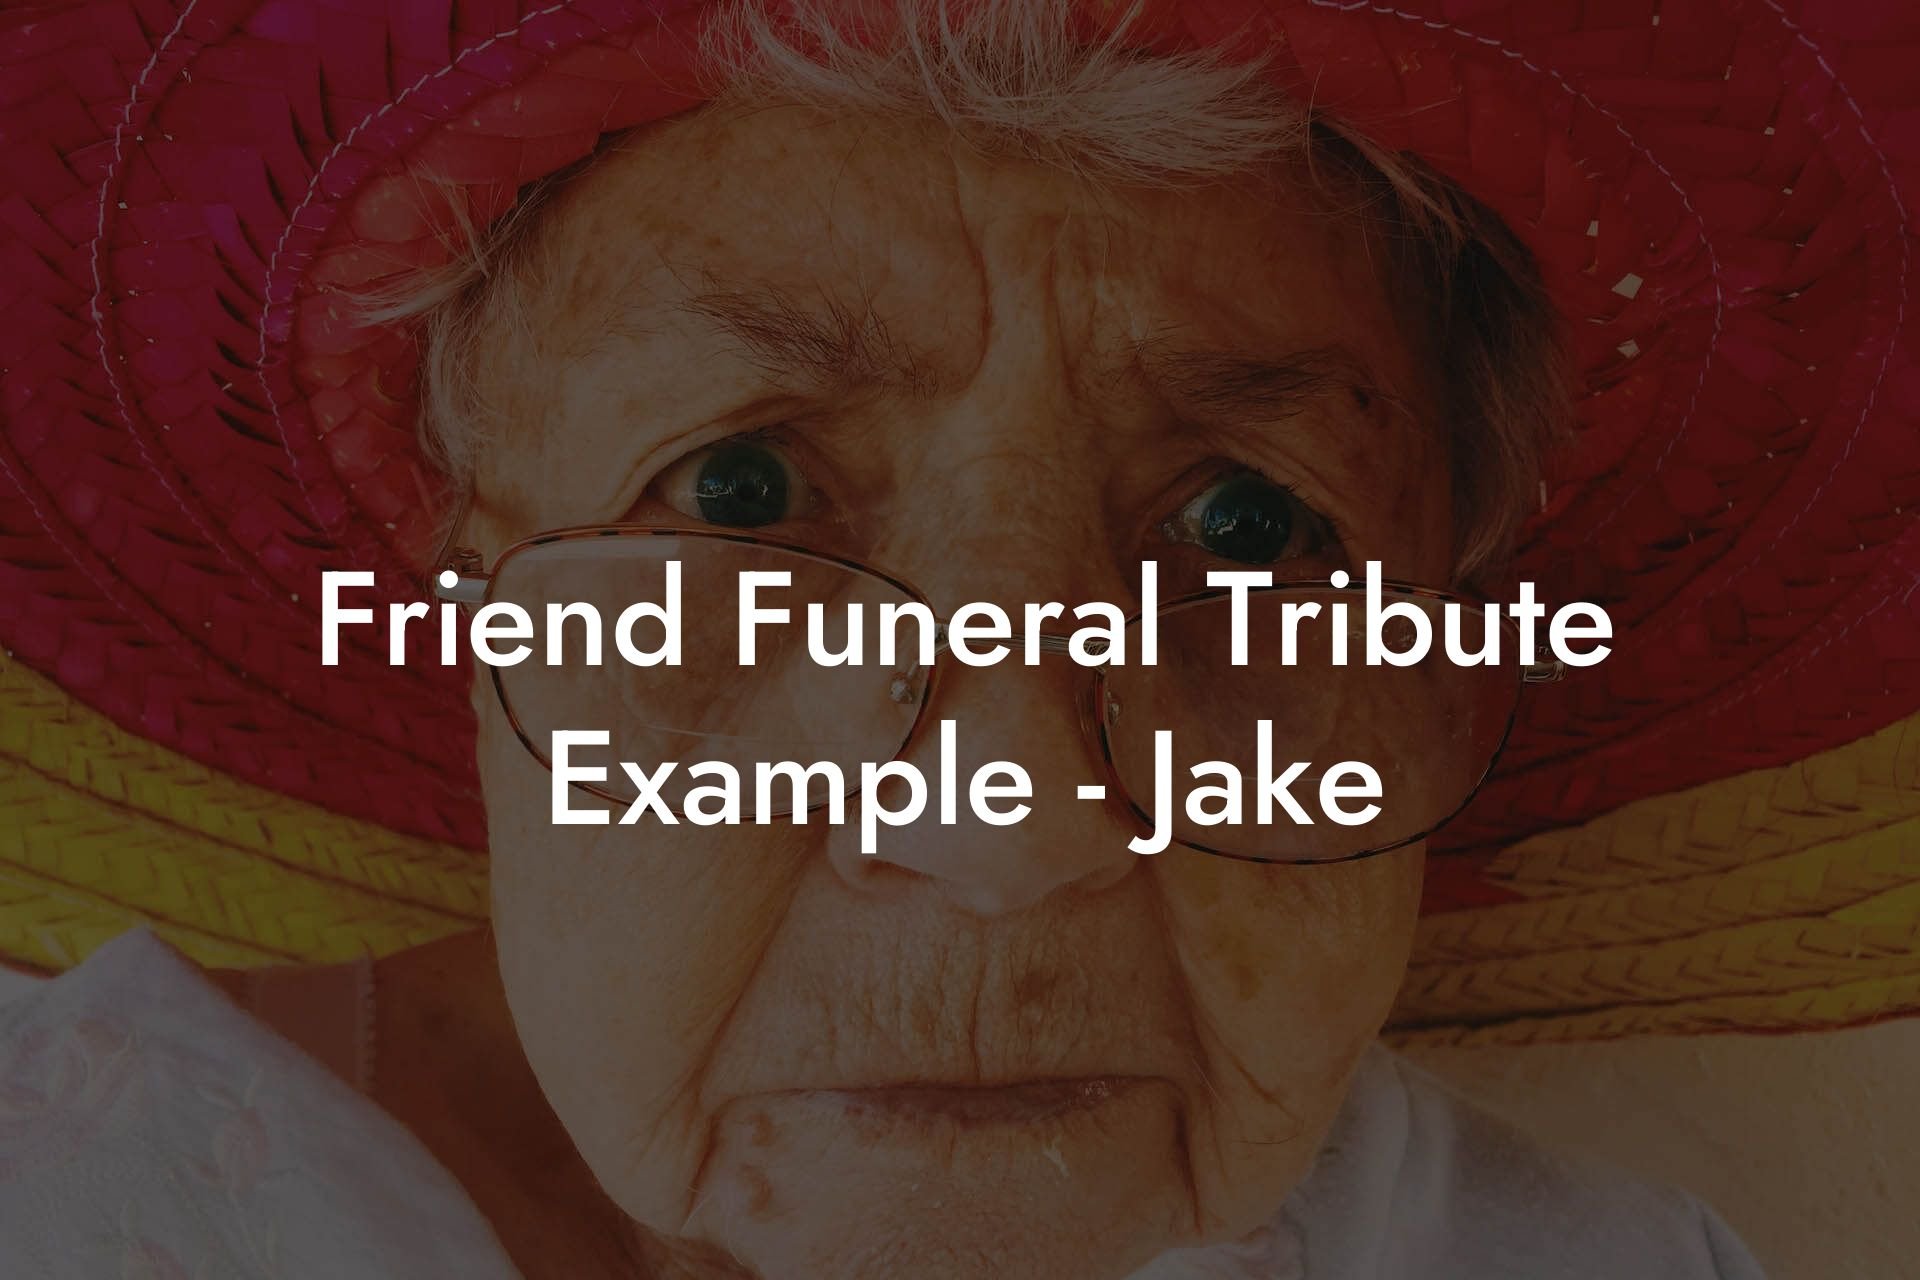 Friend Funeral Tribute Example - Jake